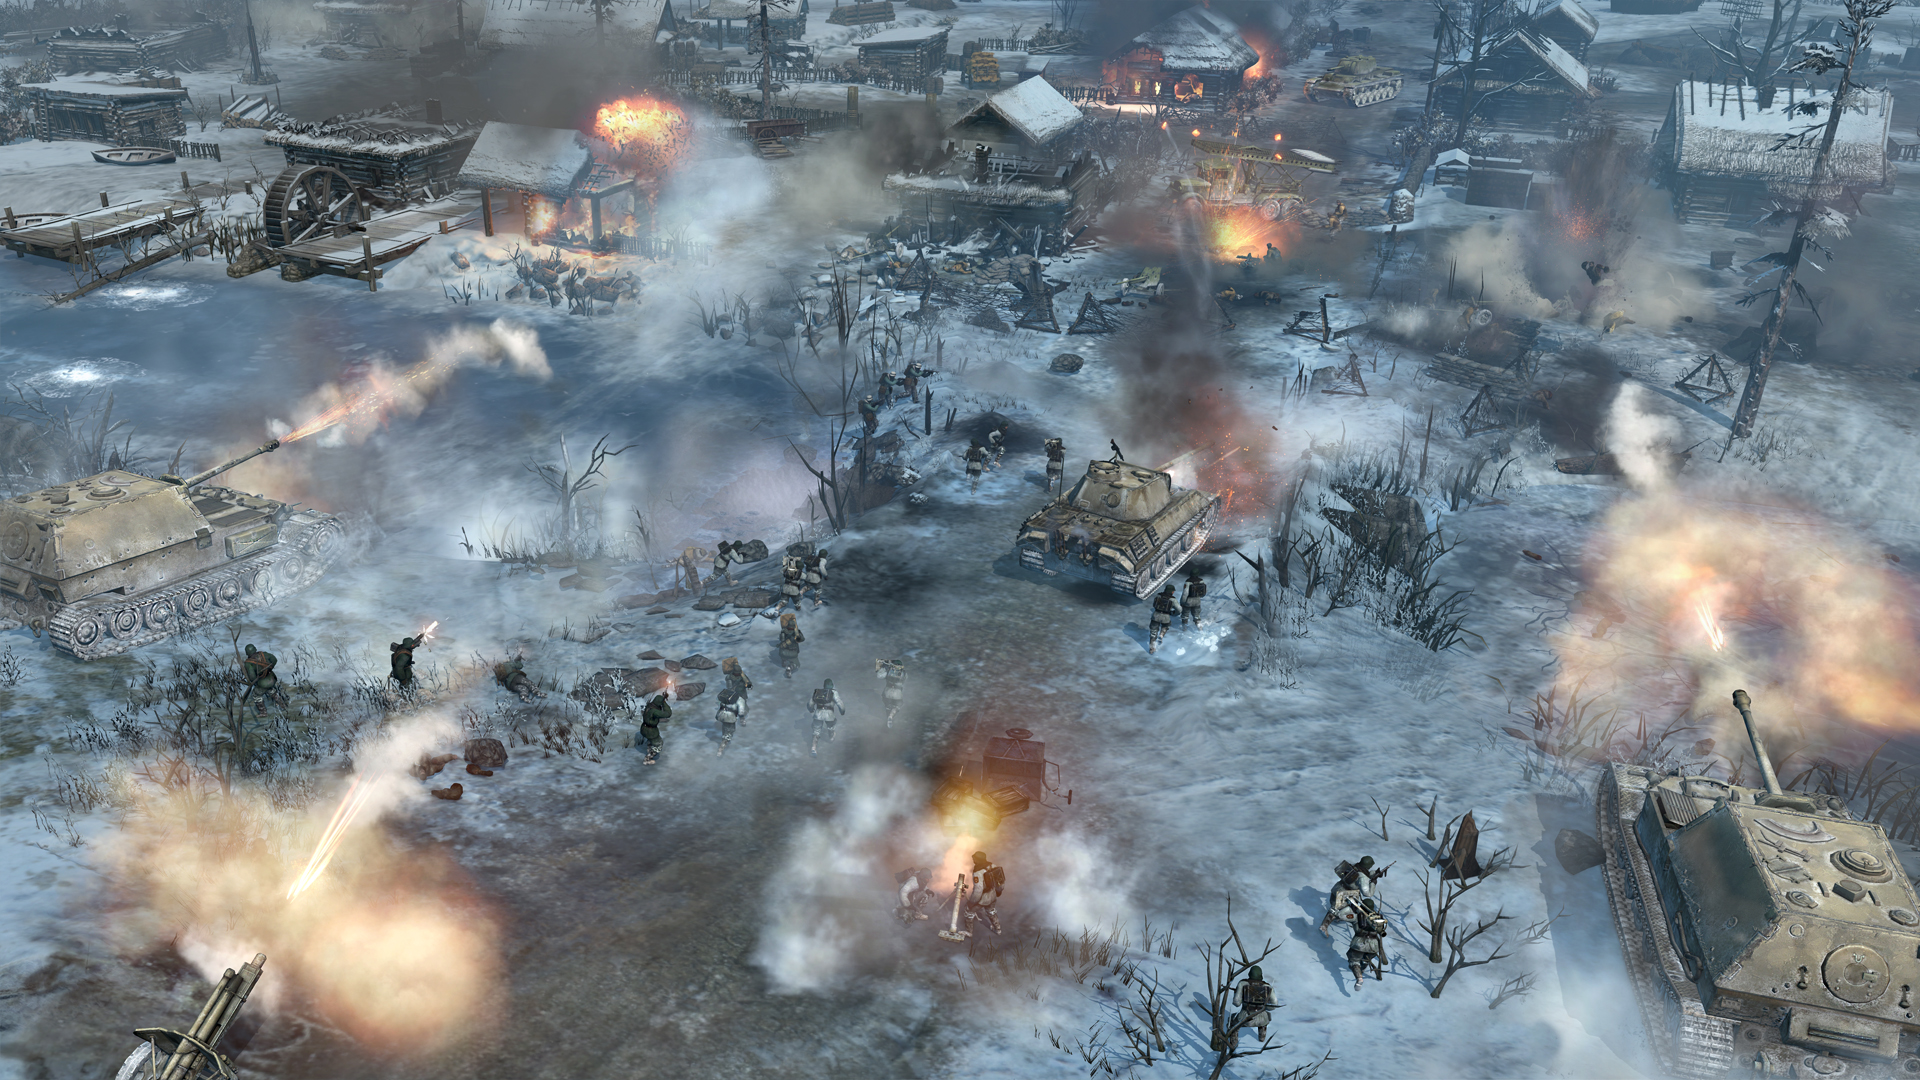 Media asset in full size related to 3dfxzone.it news item entitled as follows: Nuovi screenshot mostrano l'engine DirectX 11 di Company of Heroes 2 | Image Name: news18605_Company-of-Heroes-2-screenshot_3.jpg